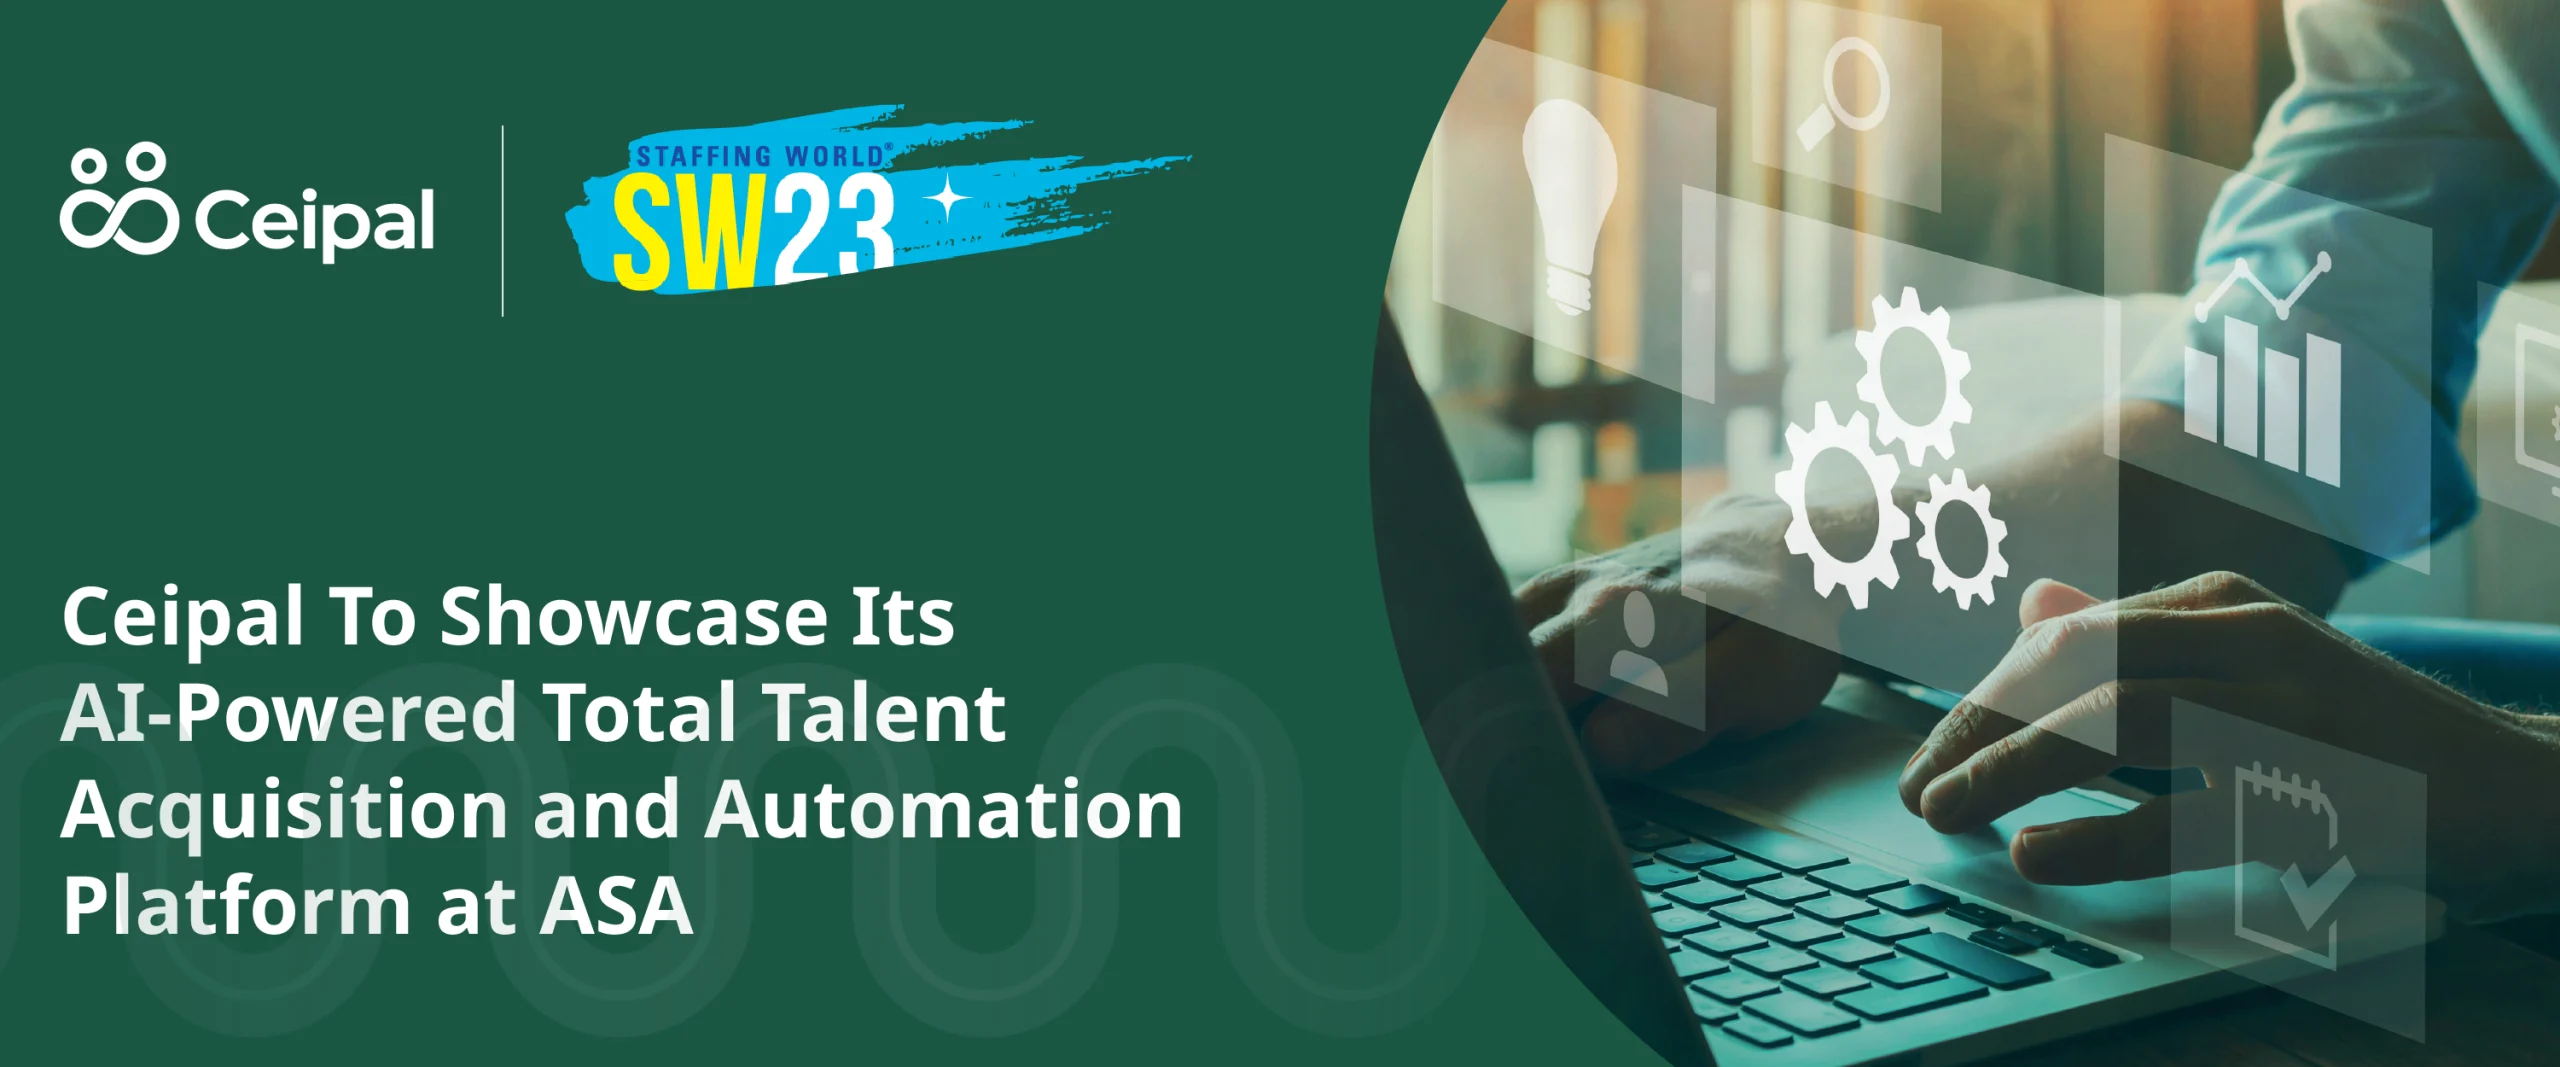 Ceipal To Showcase Its AI-Powered Total Talent Acquisition and Automation Platform at the American Staffing Association’s Staffing World 2023